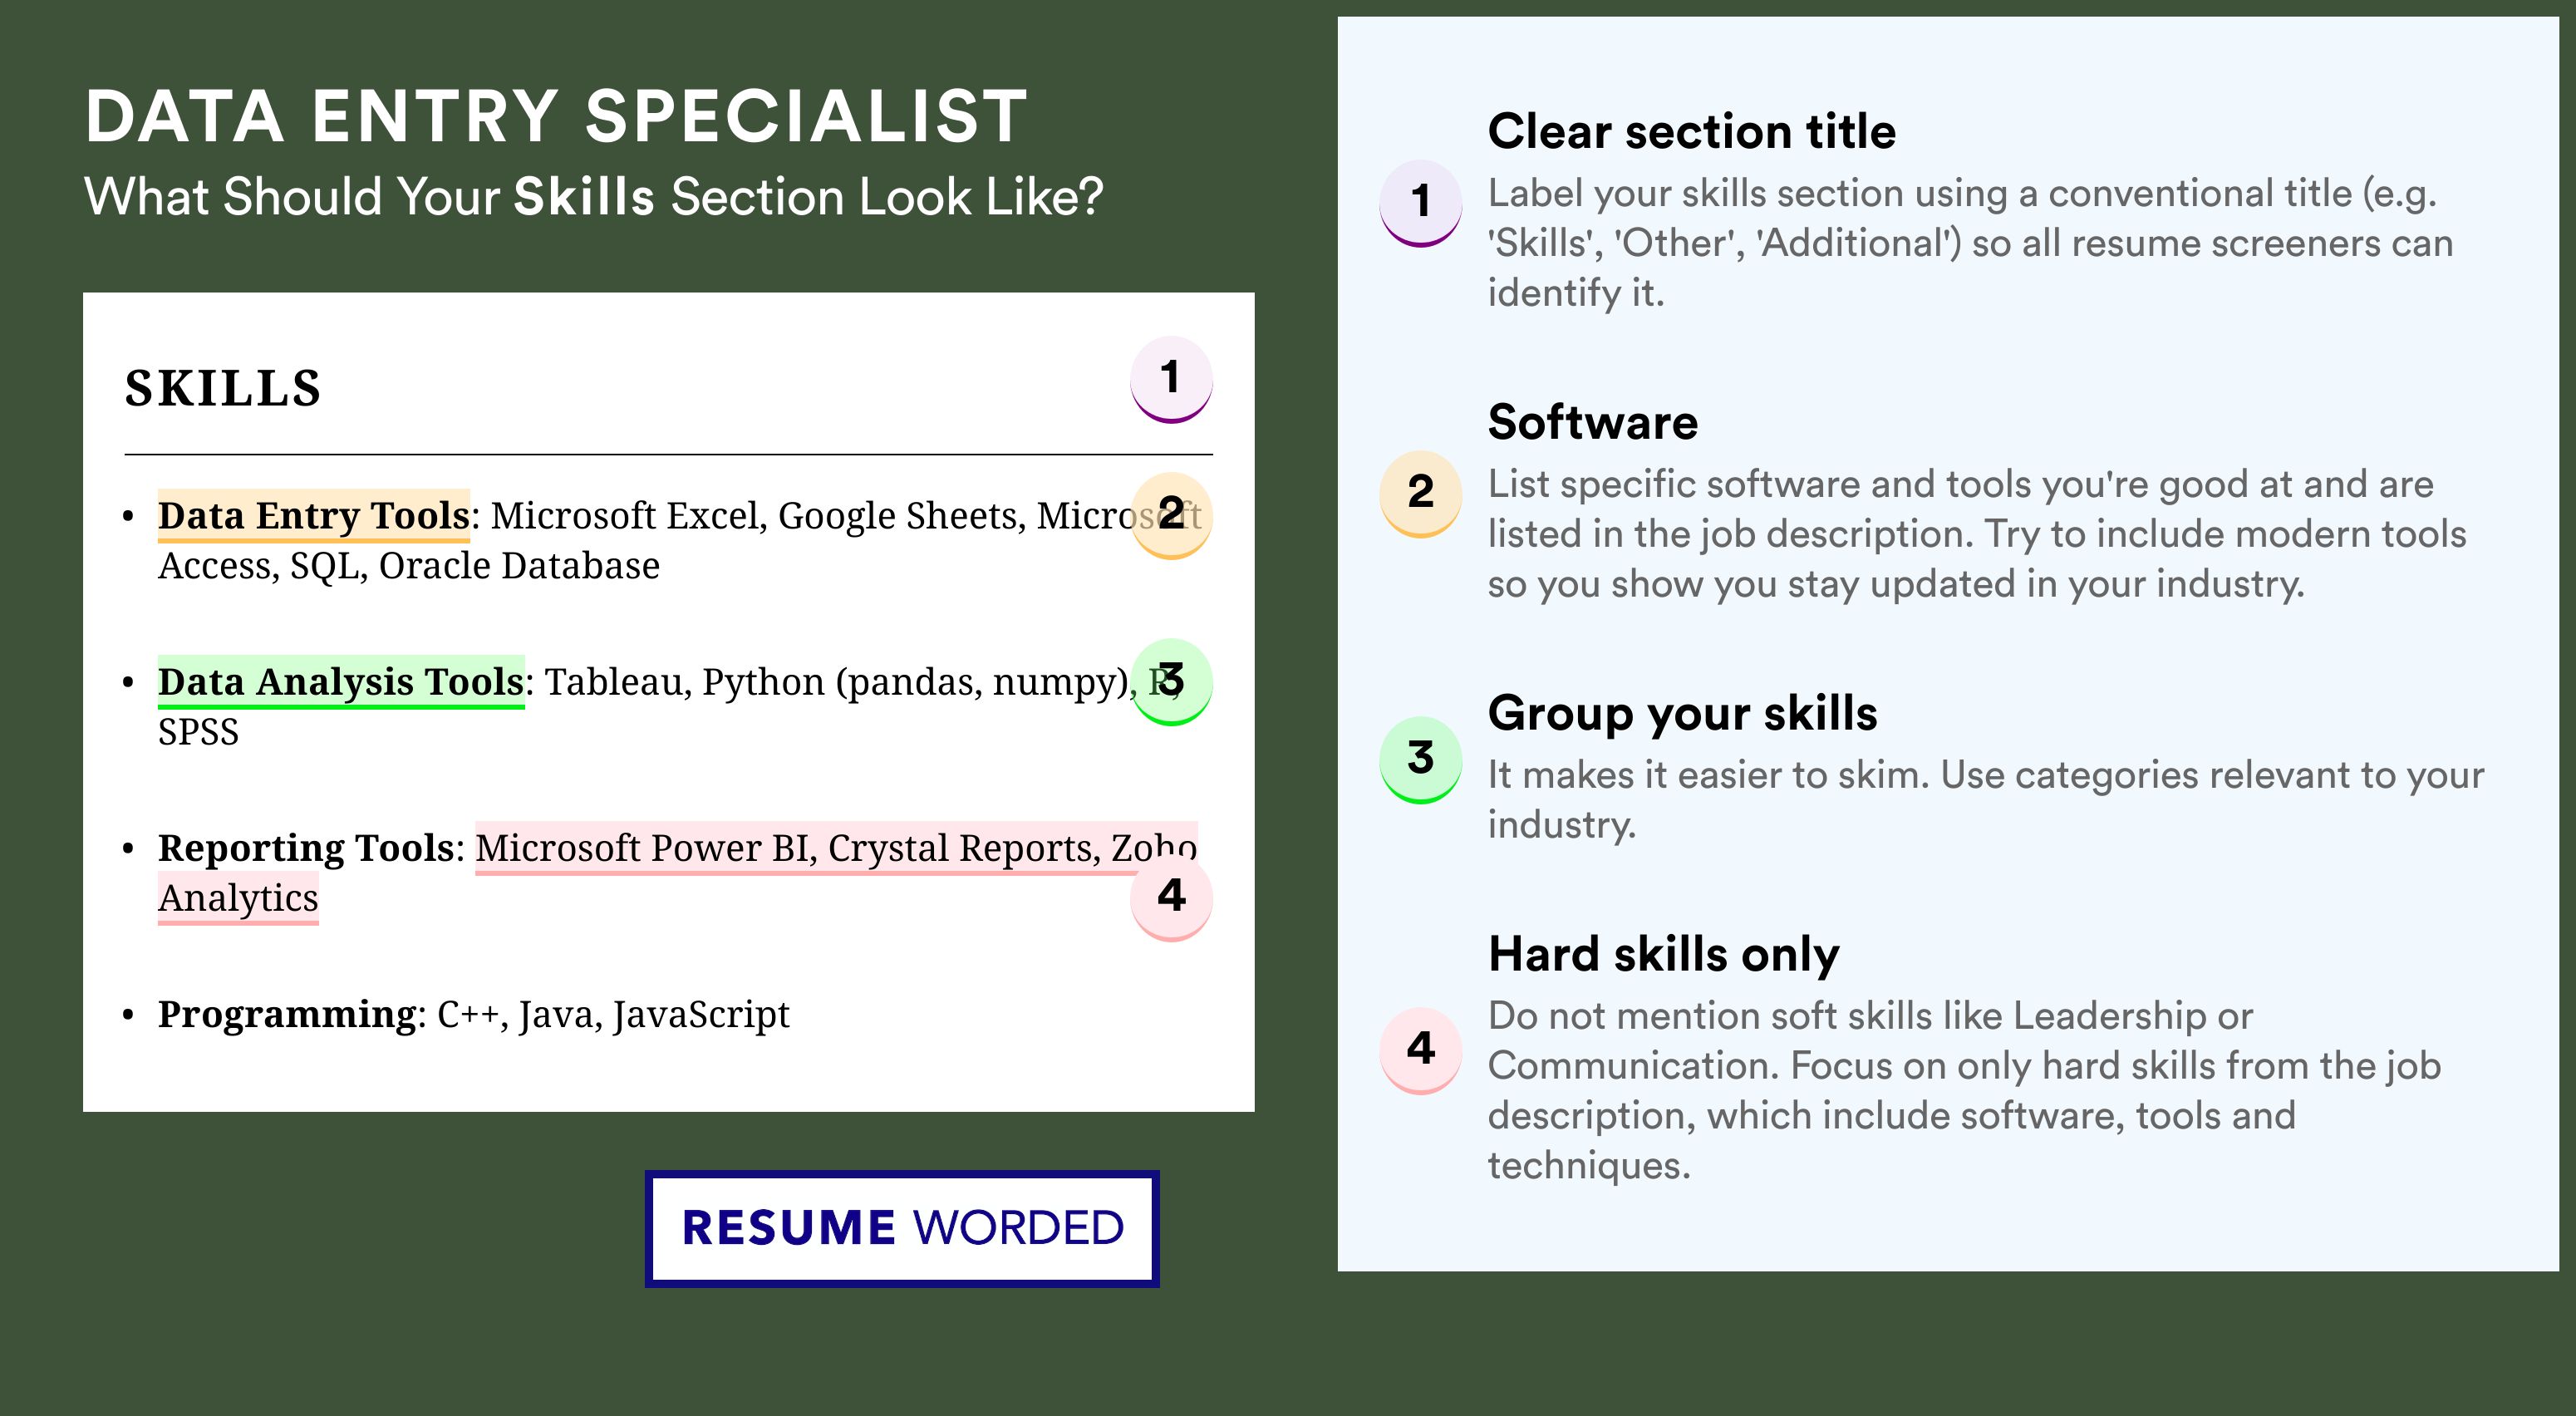 How To Write Your Skills Section - Data Entry Specialist Roles